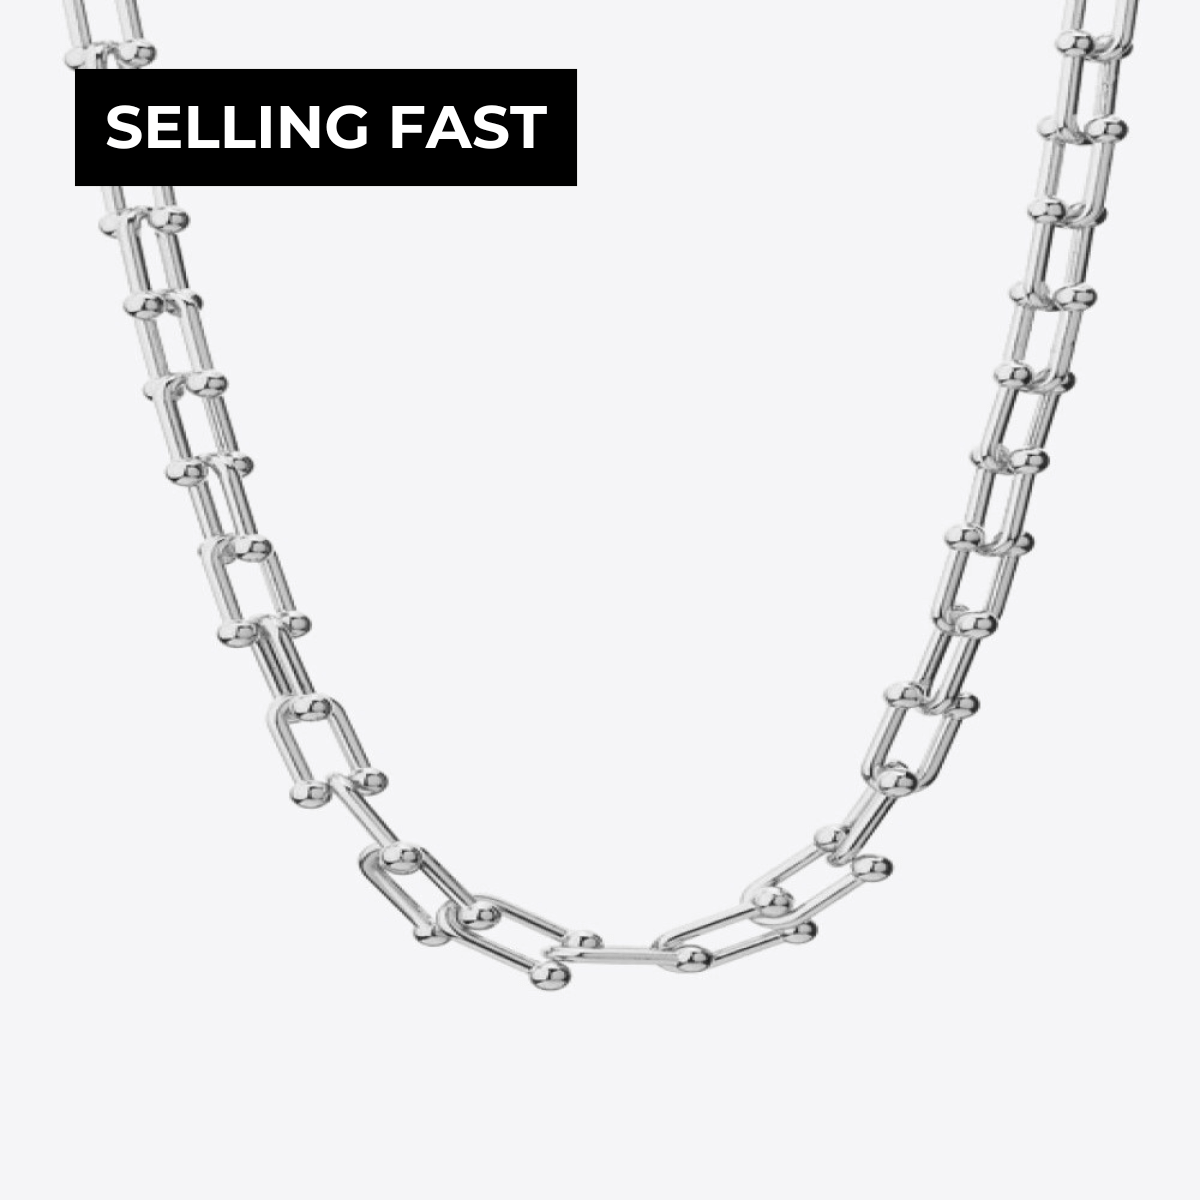 Fun Day Ahead - Silver Graduated Link Chain Necklace